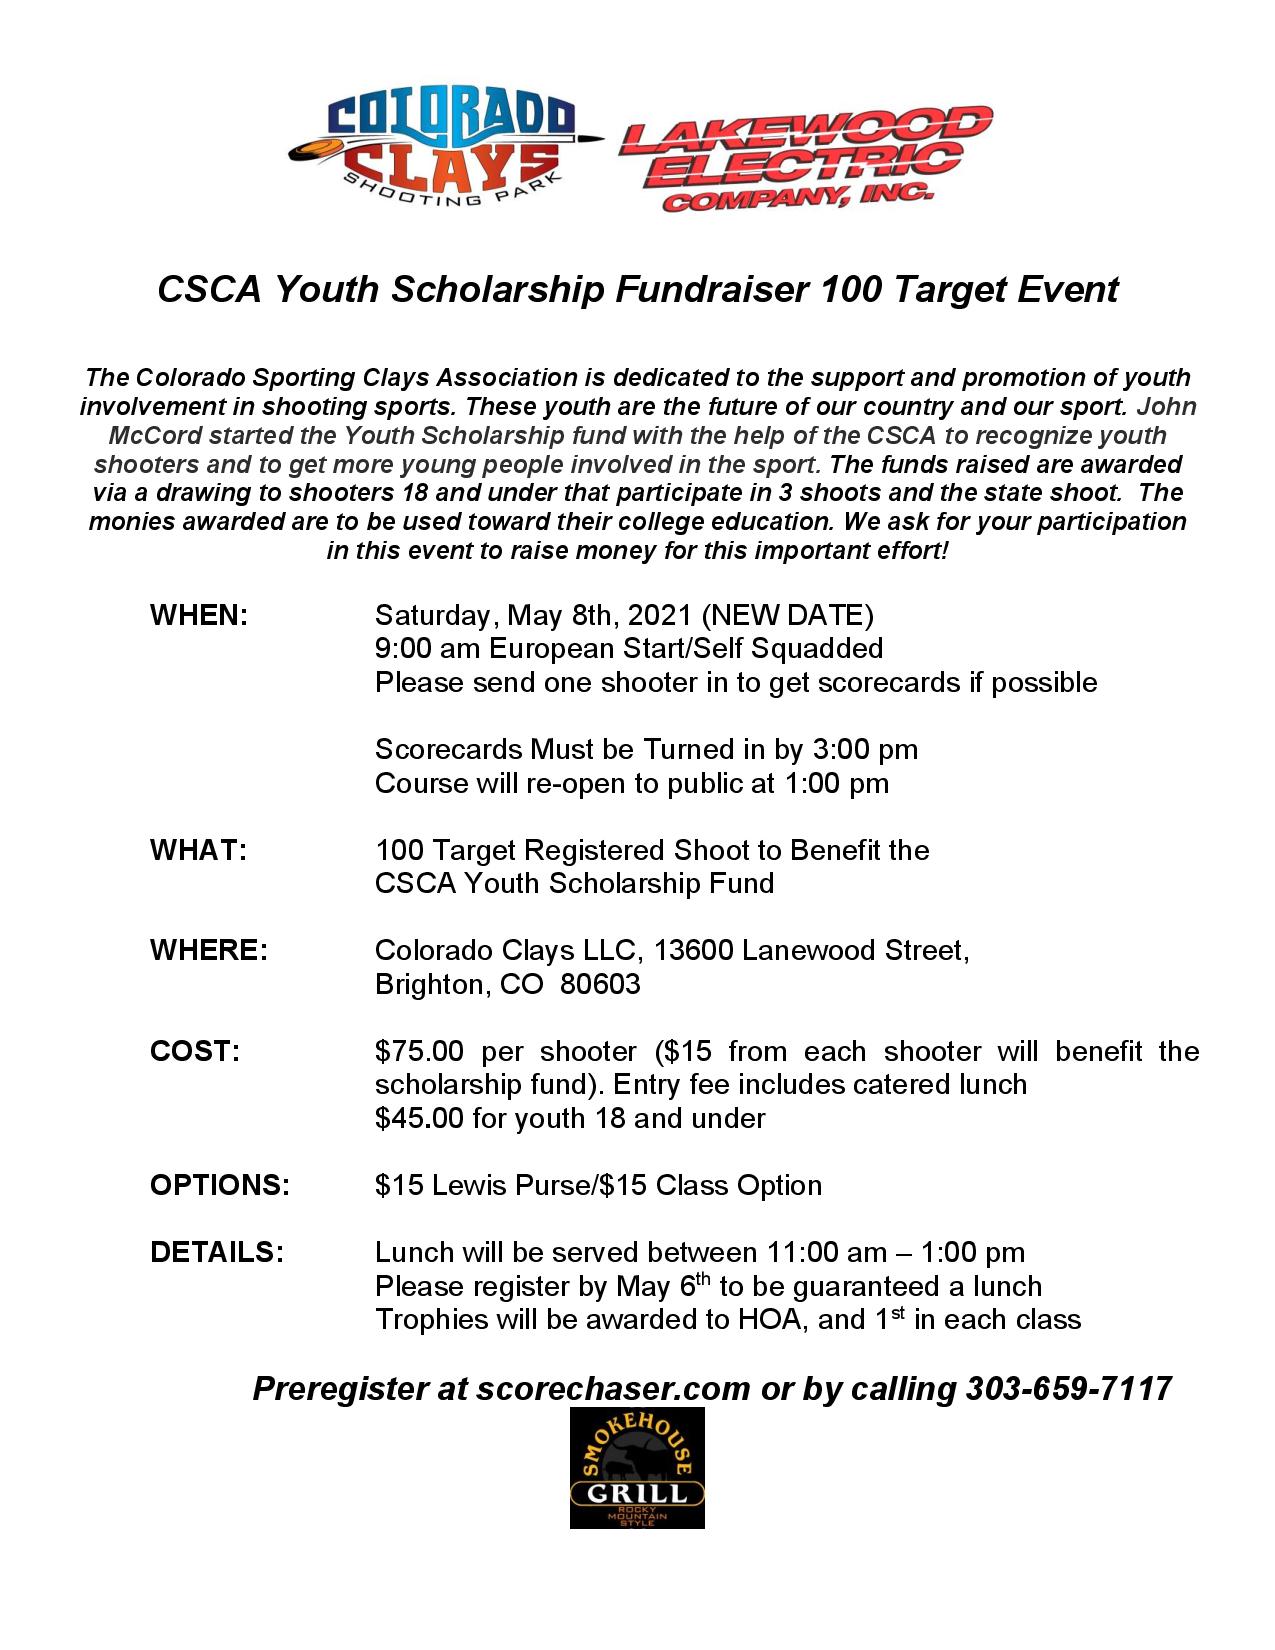 CSCA Youth Scholarship Fundraiser 100 Target Event